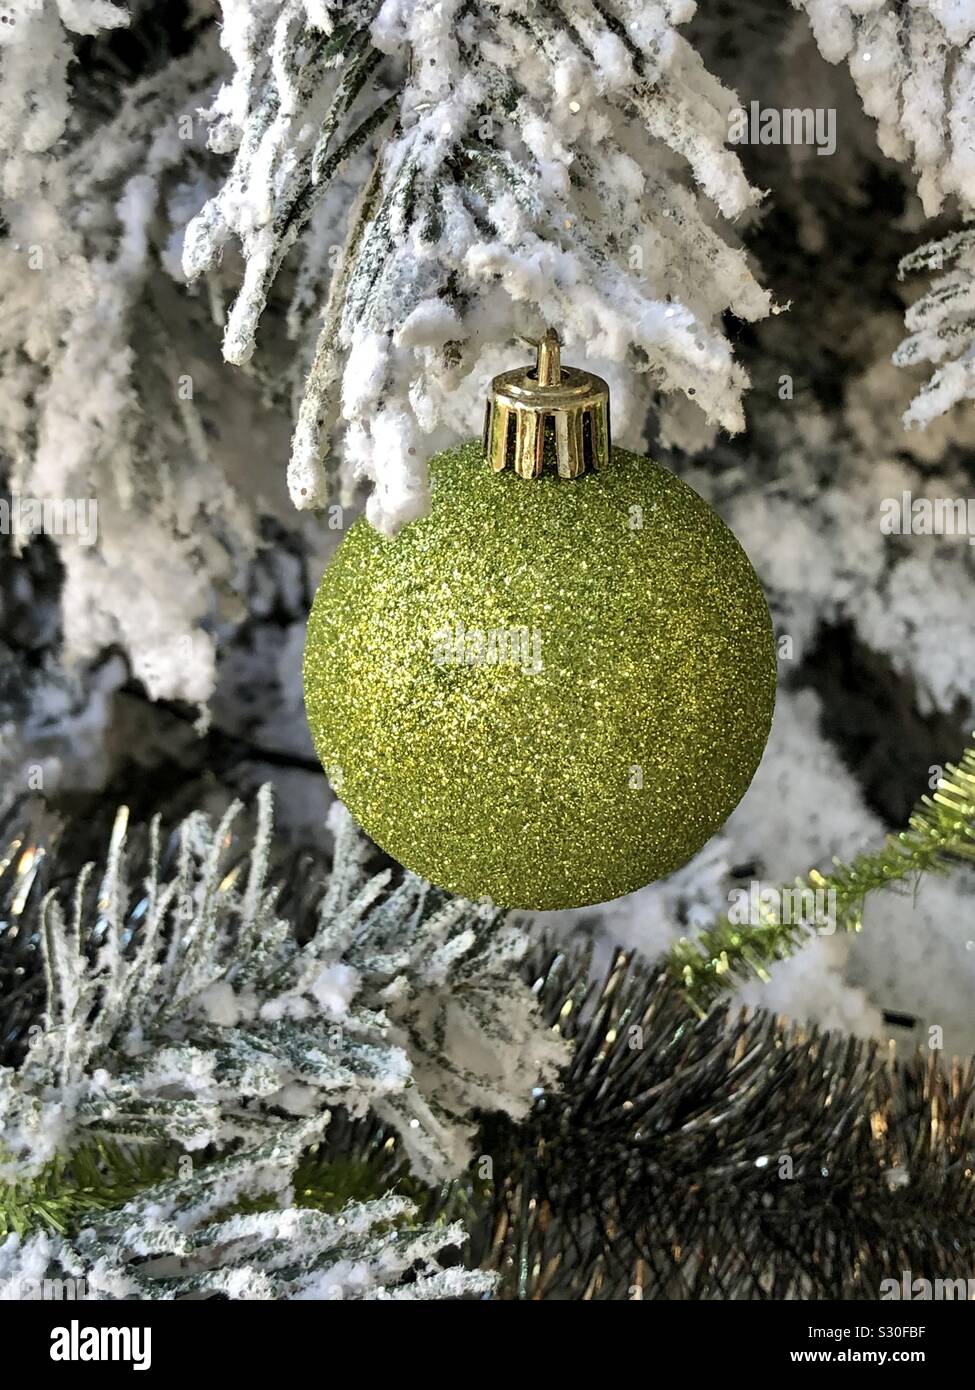 White Xmas tree decorated with with green hanging ornament. Stock Photo